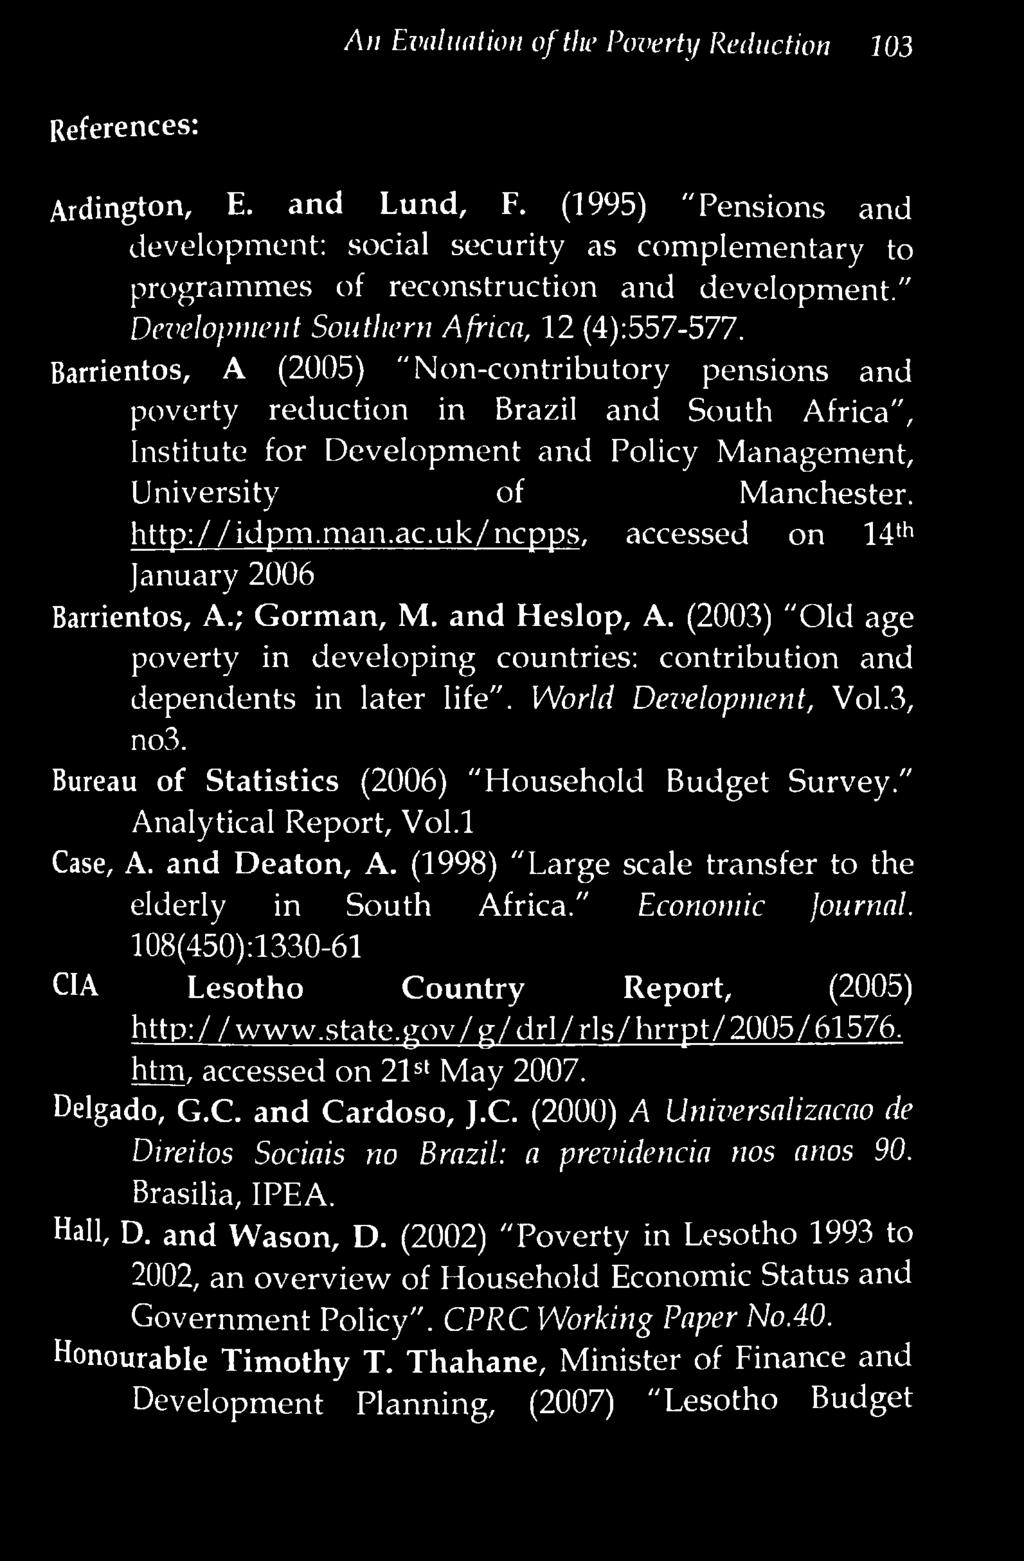 B a rrie n to s, A (2005) "N on-contributory pensions and poverty reduction in Brazil and South Africa", Institute for Developm ent and Policy M anagem ent, University of M anchester. http://idpm.